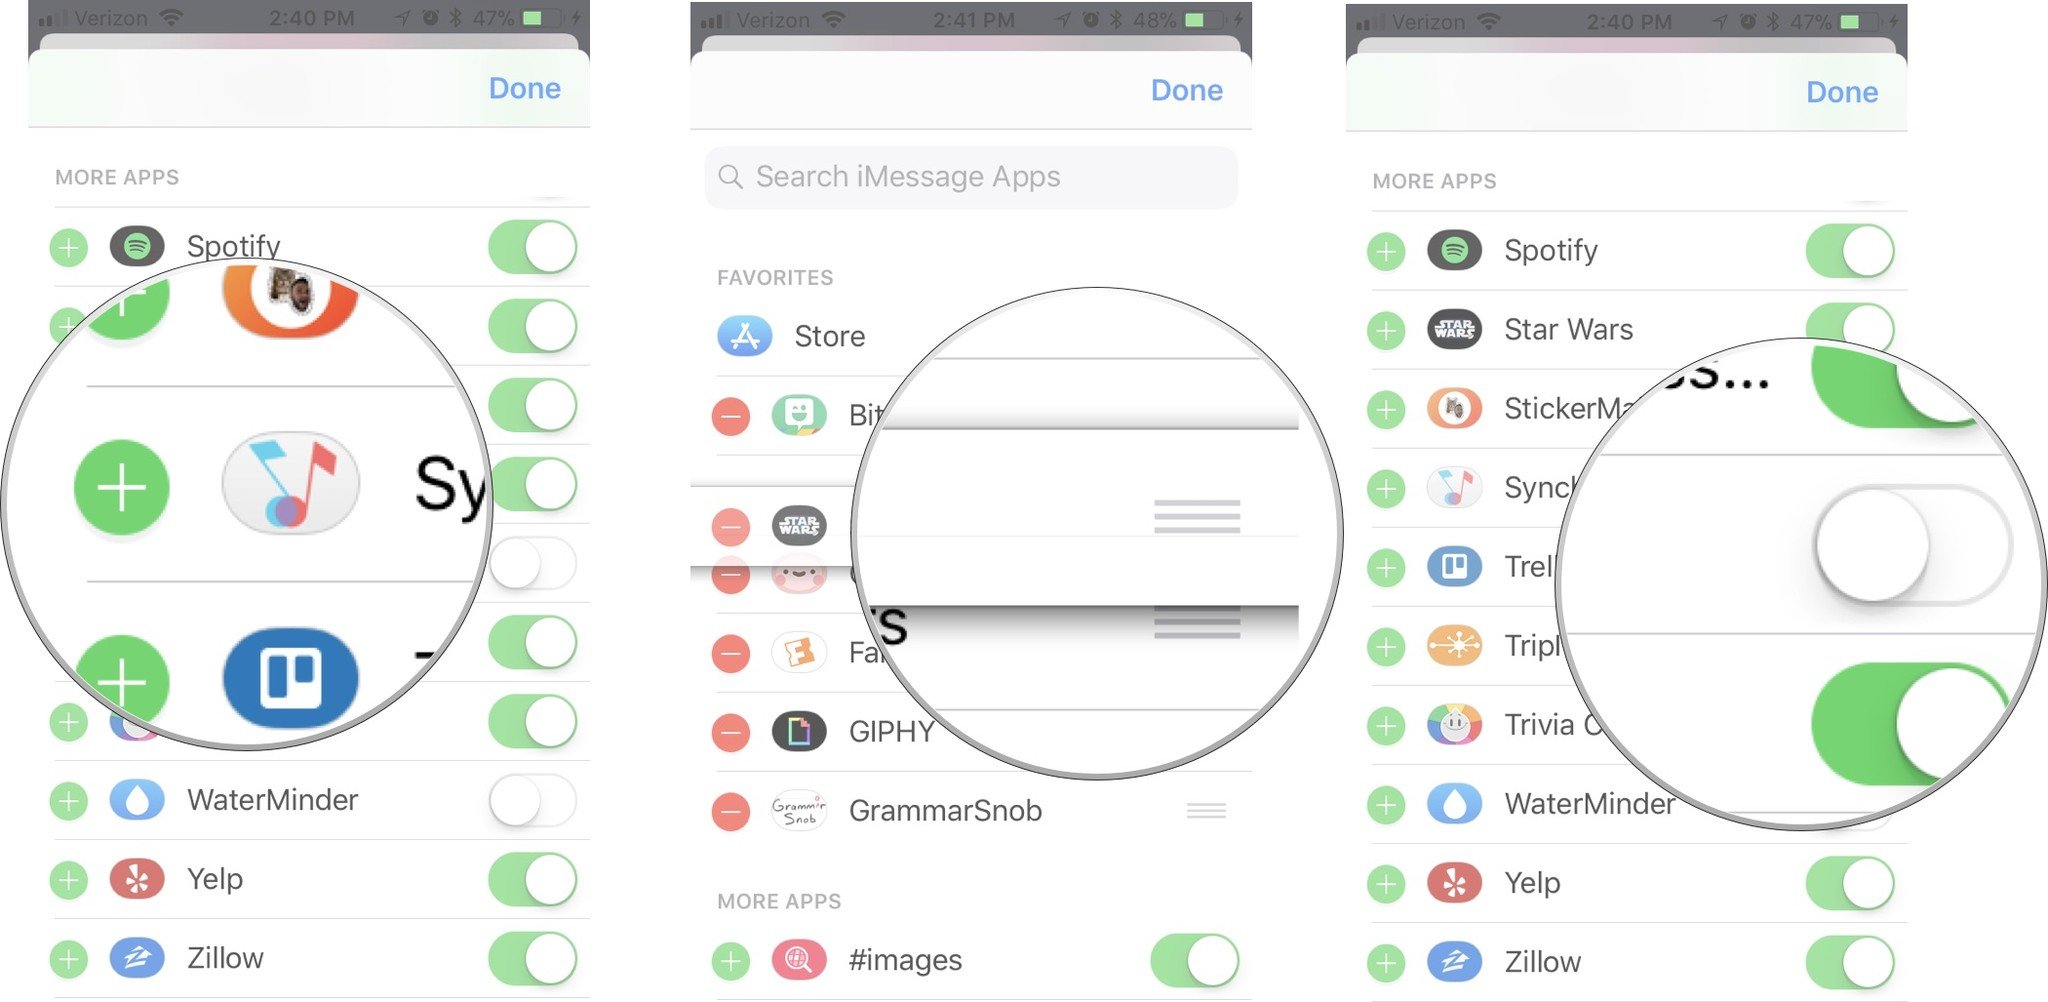 How to customize the app tray showing how to tap the add button to add an app to favorites, hold an app until it hovers to move it, tap the switch to disable an app in iMessage